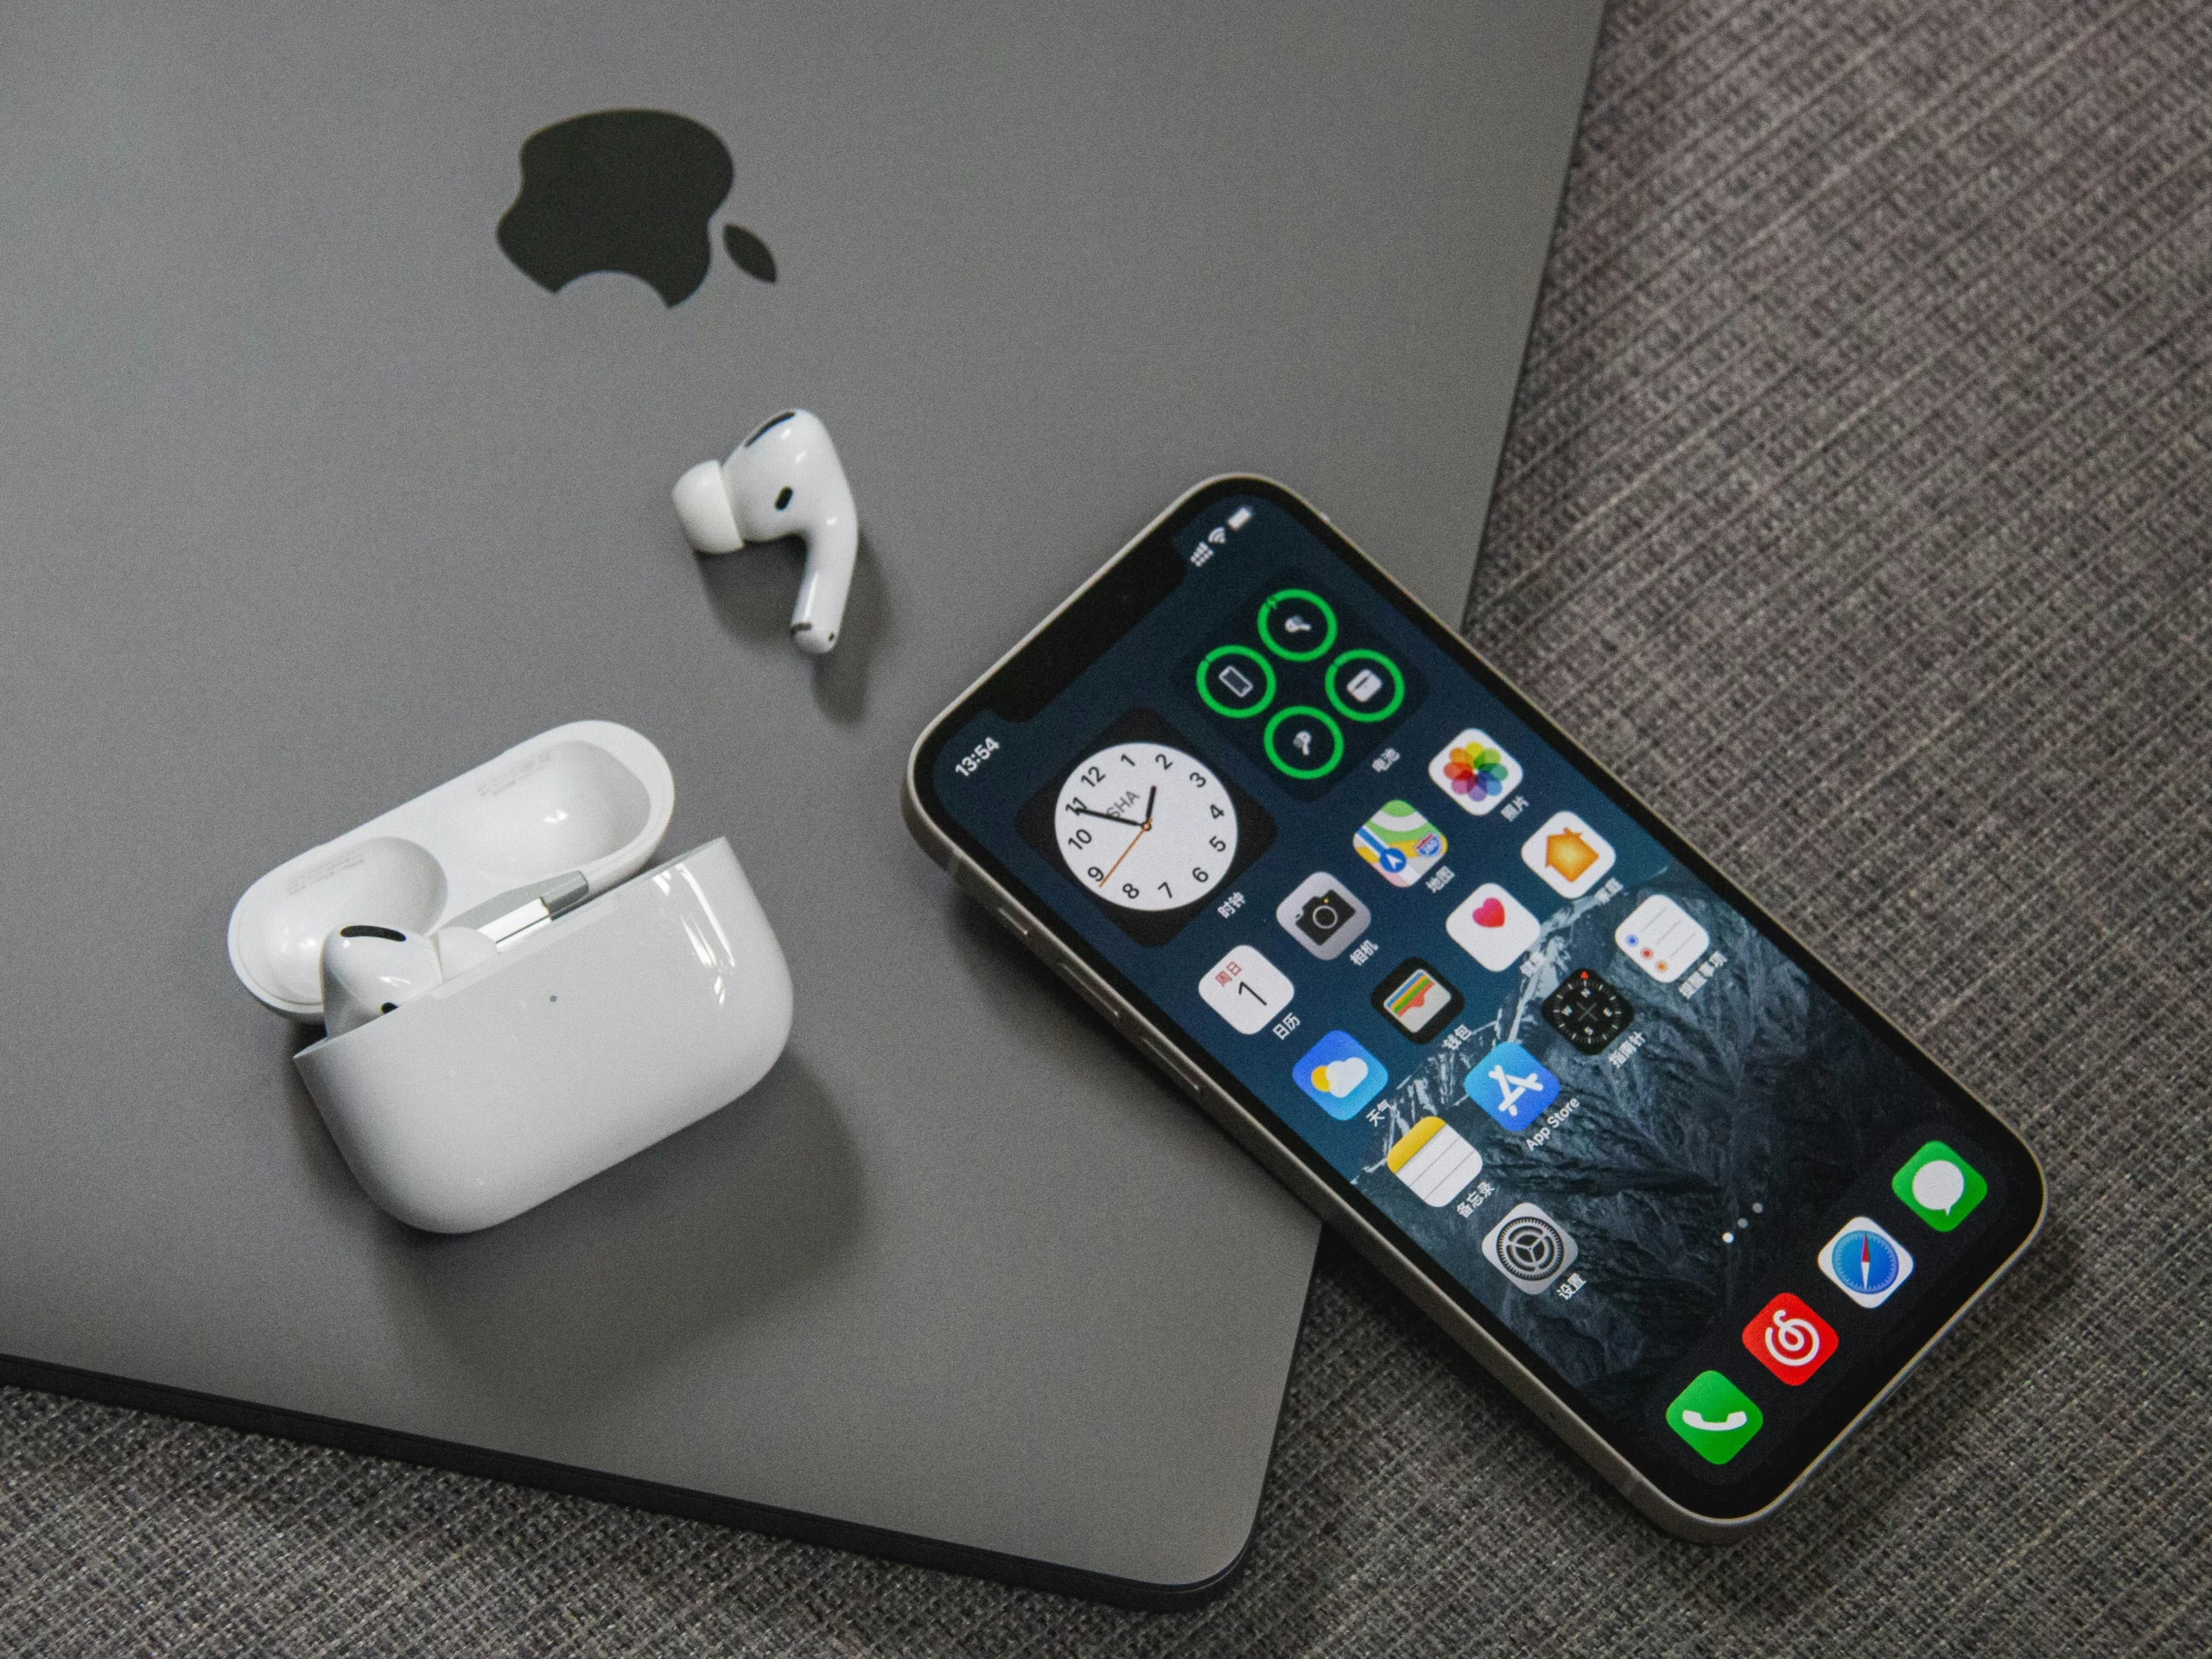 A macbook, iphone, and airpods are on a desk. ADHD cleaning tips suggest they can help minimize distractions if used correctly.